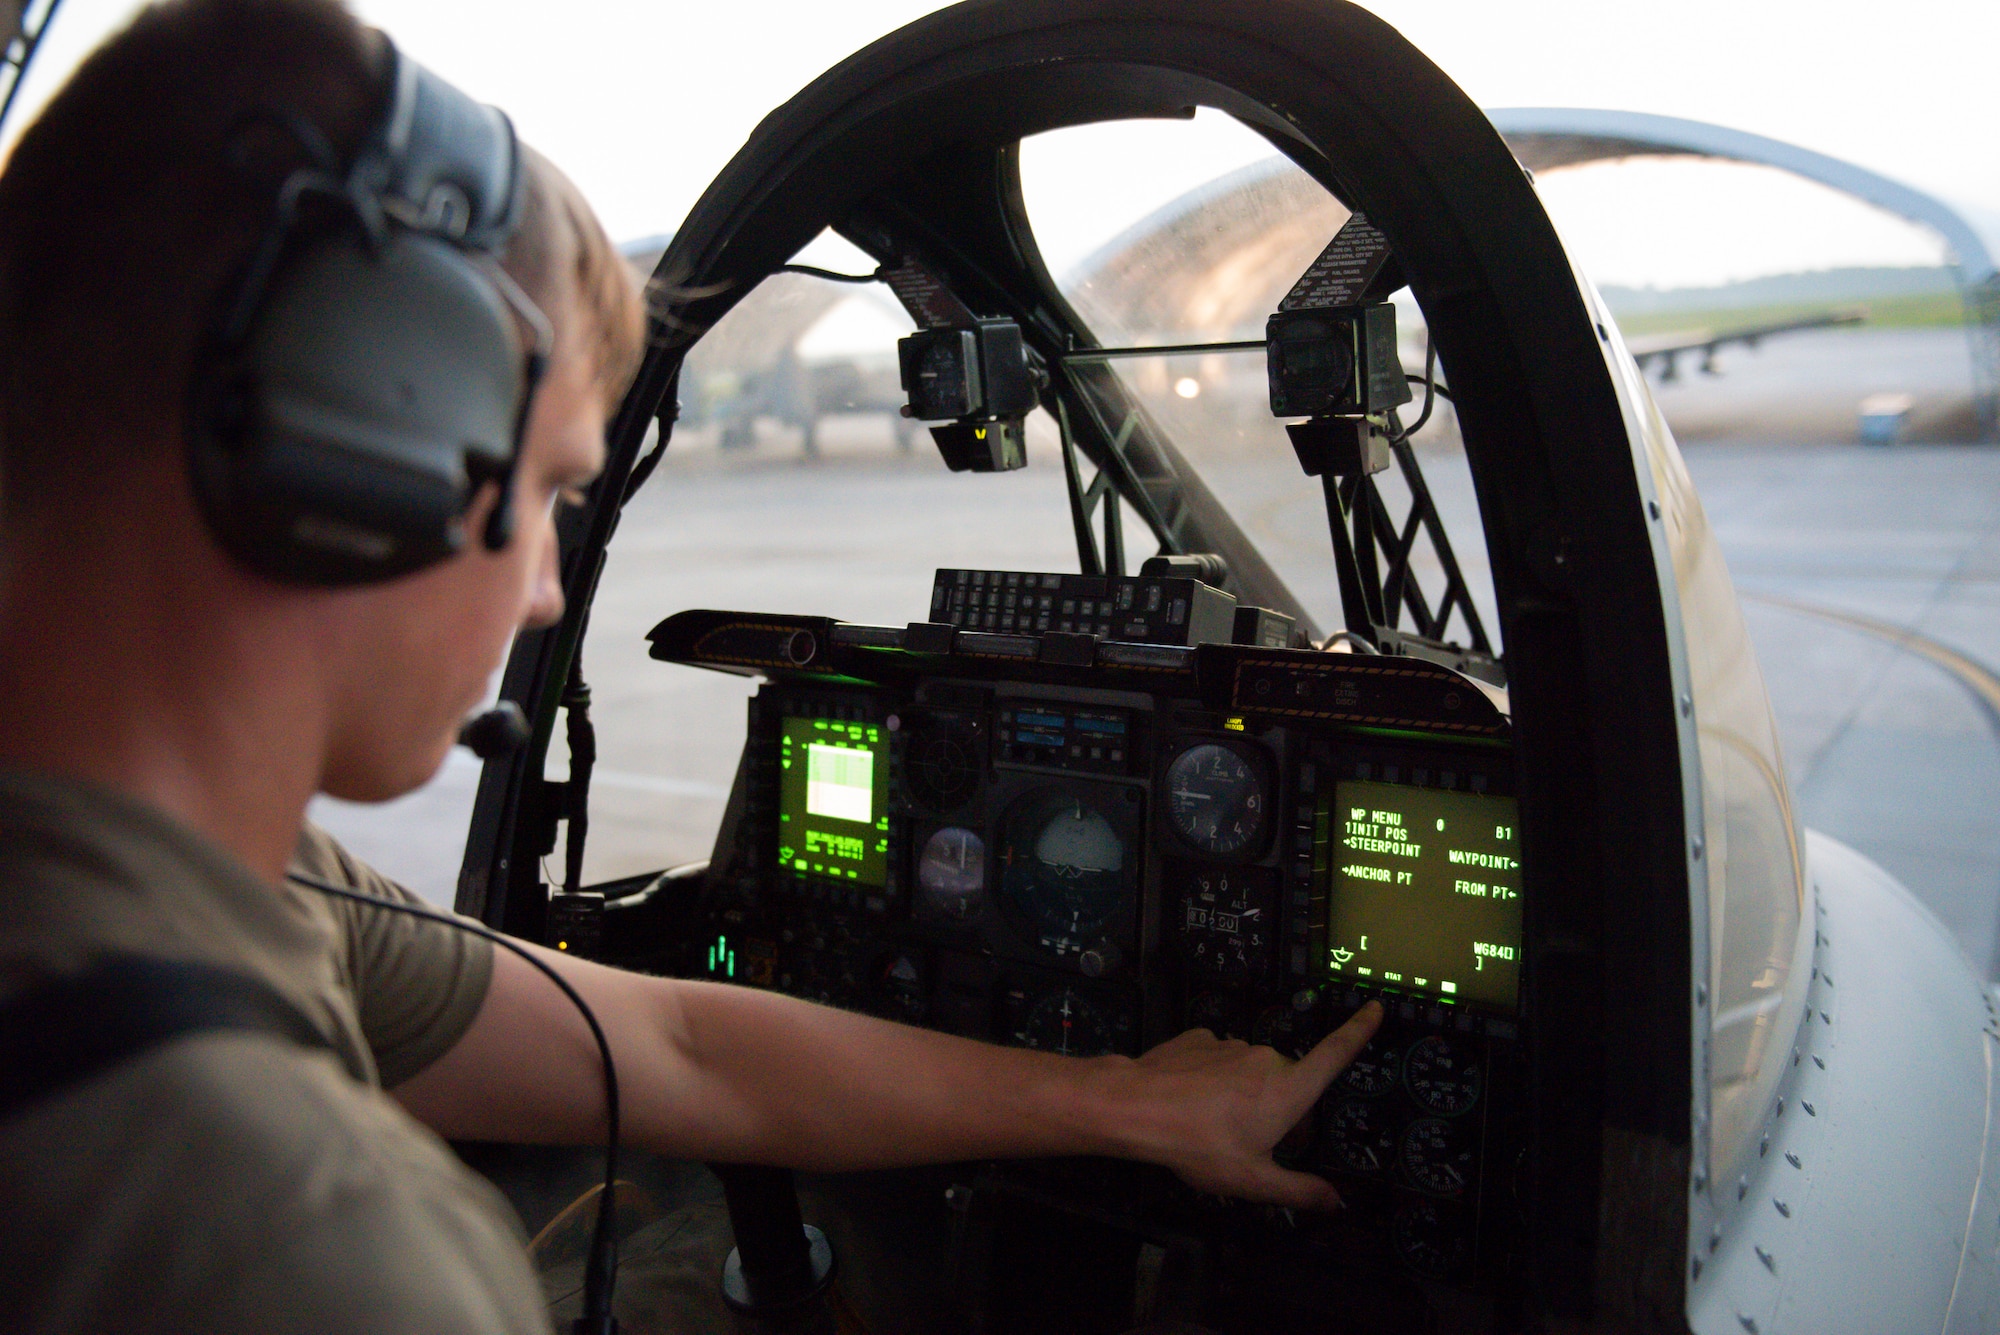 Airman 1st Class Tanner Giroux, 75th Aircraft Maintenance Unit (AMU) avionics technician, checks avionics systems from the cockpit of an A-10C Thunderbolt II, Aug. 9, 2019, at Moody Air Force Base, Ga. The 75th AMU is responsible for the upkeep and maintenance of the Air Force’s largest operational A-10C Thunderbolt II fighter group. (U.S.  Air Force photo by 2nd Lt. Kaylin P. Hankerson)